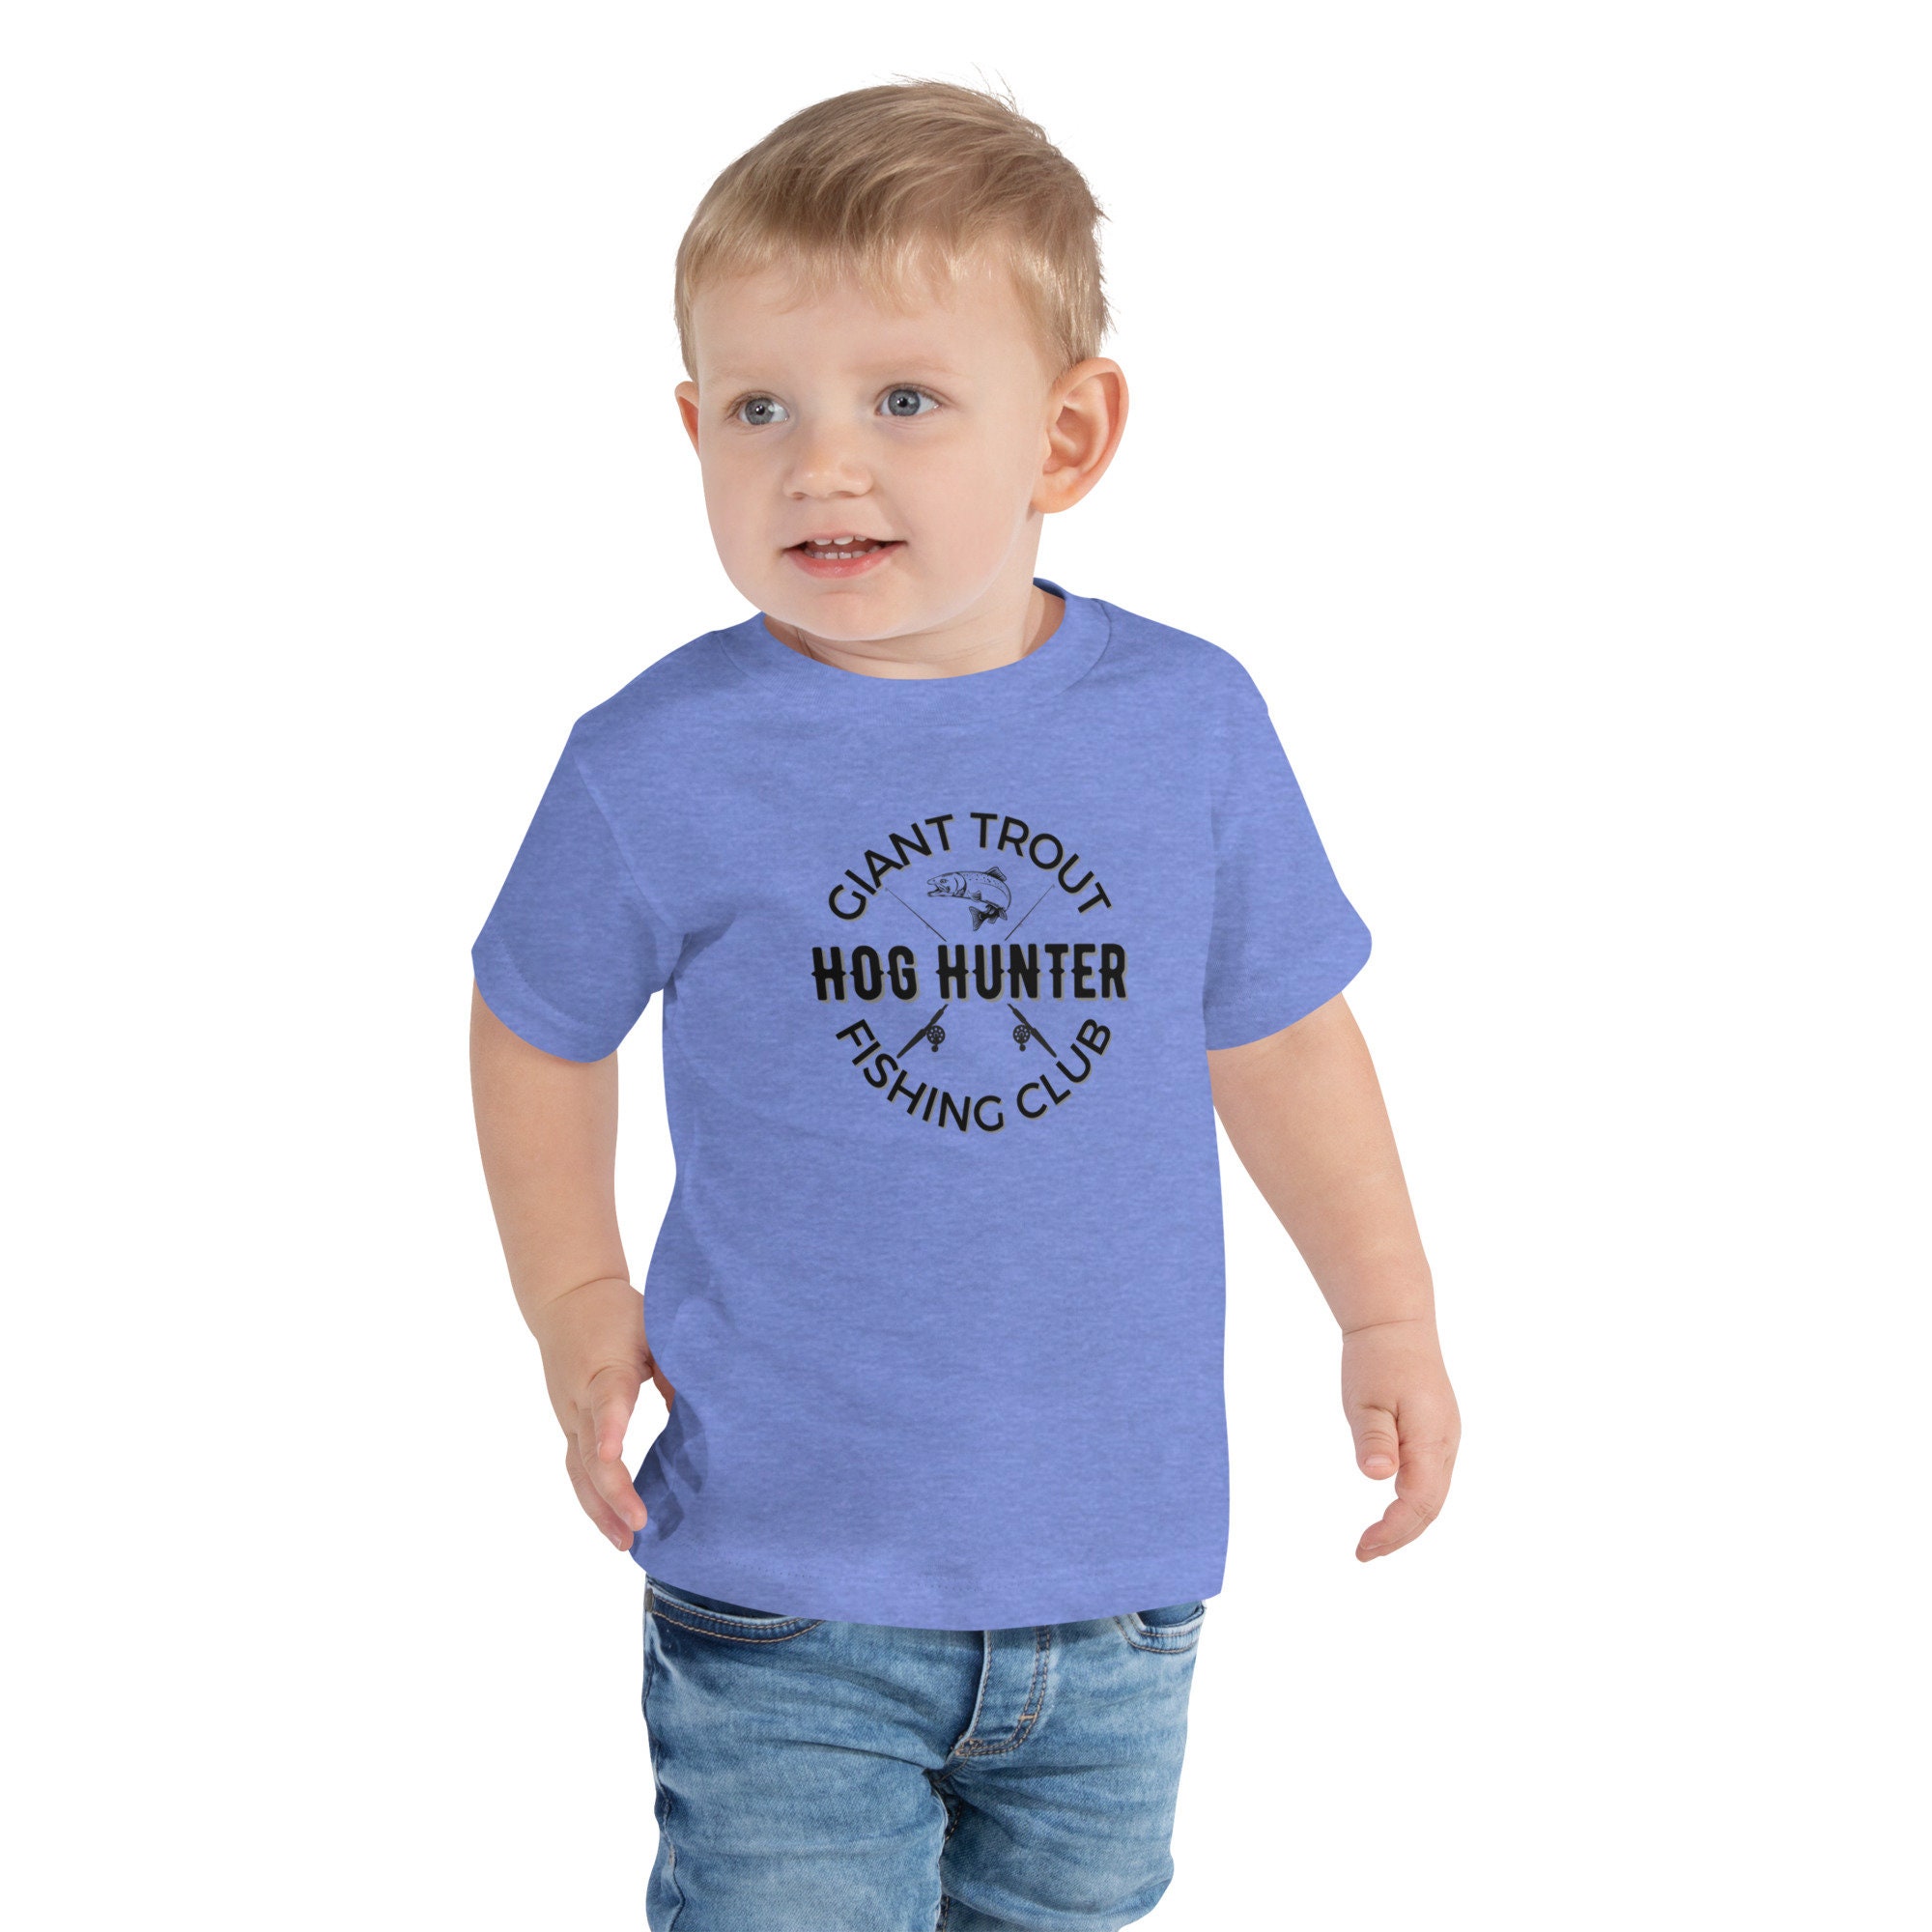 Toddler Short Sleeve Tee Giant Trout Fishing Club Fly Fishing Shirt 